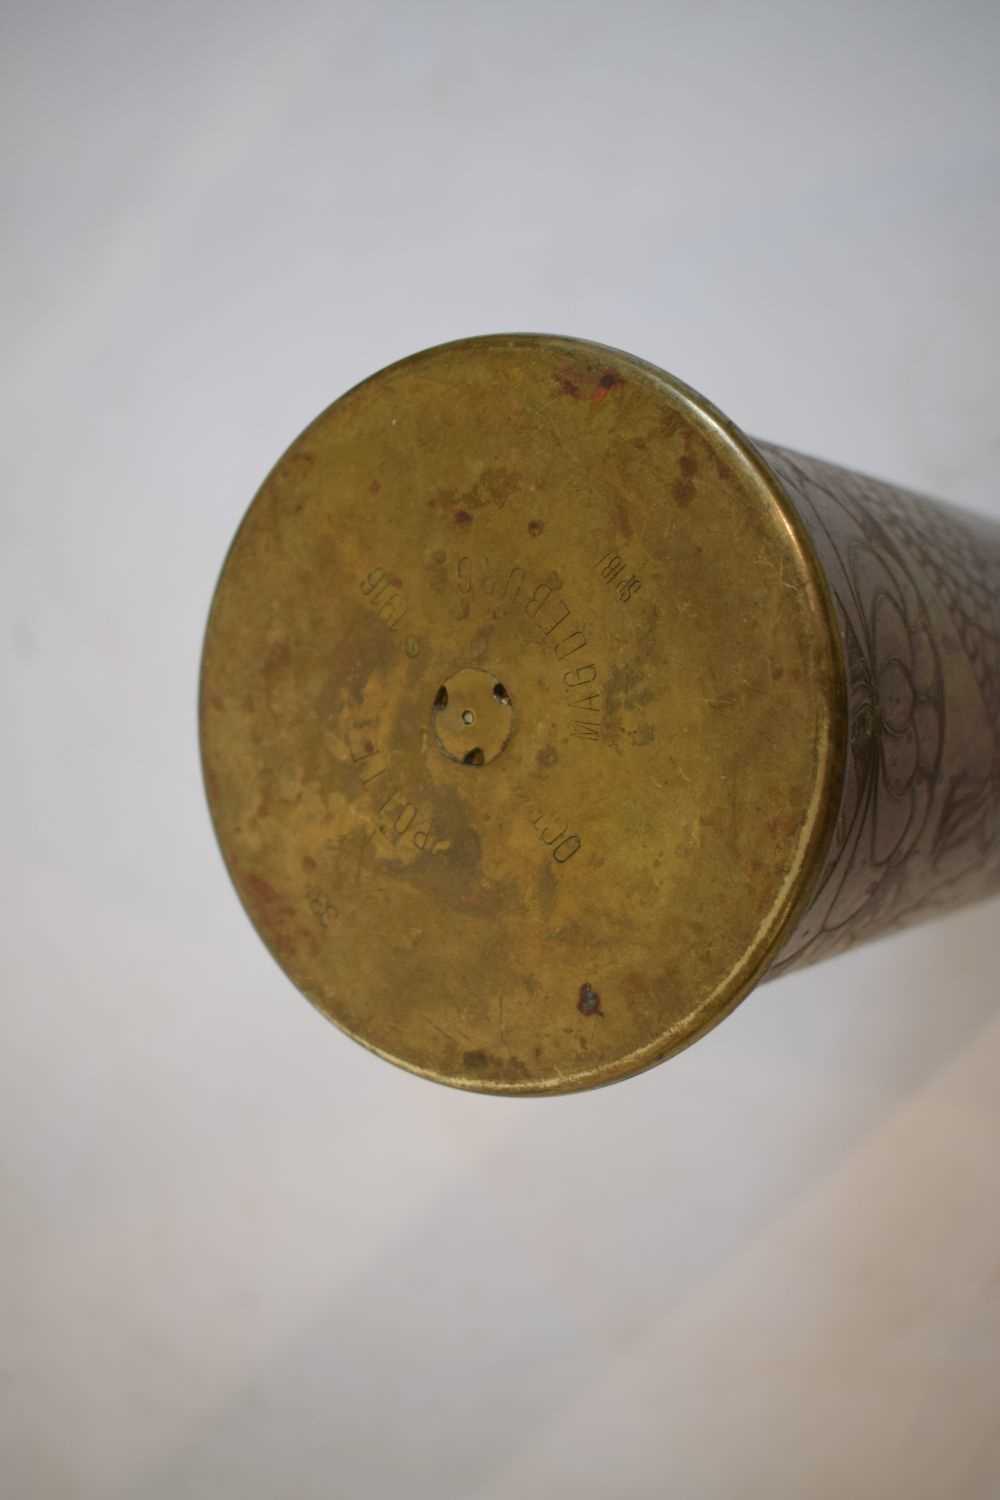 WWI brass shell case dated 1916 and engraved with chinoiserie decoration - Image 4 of 4